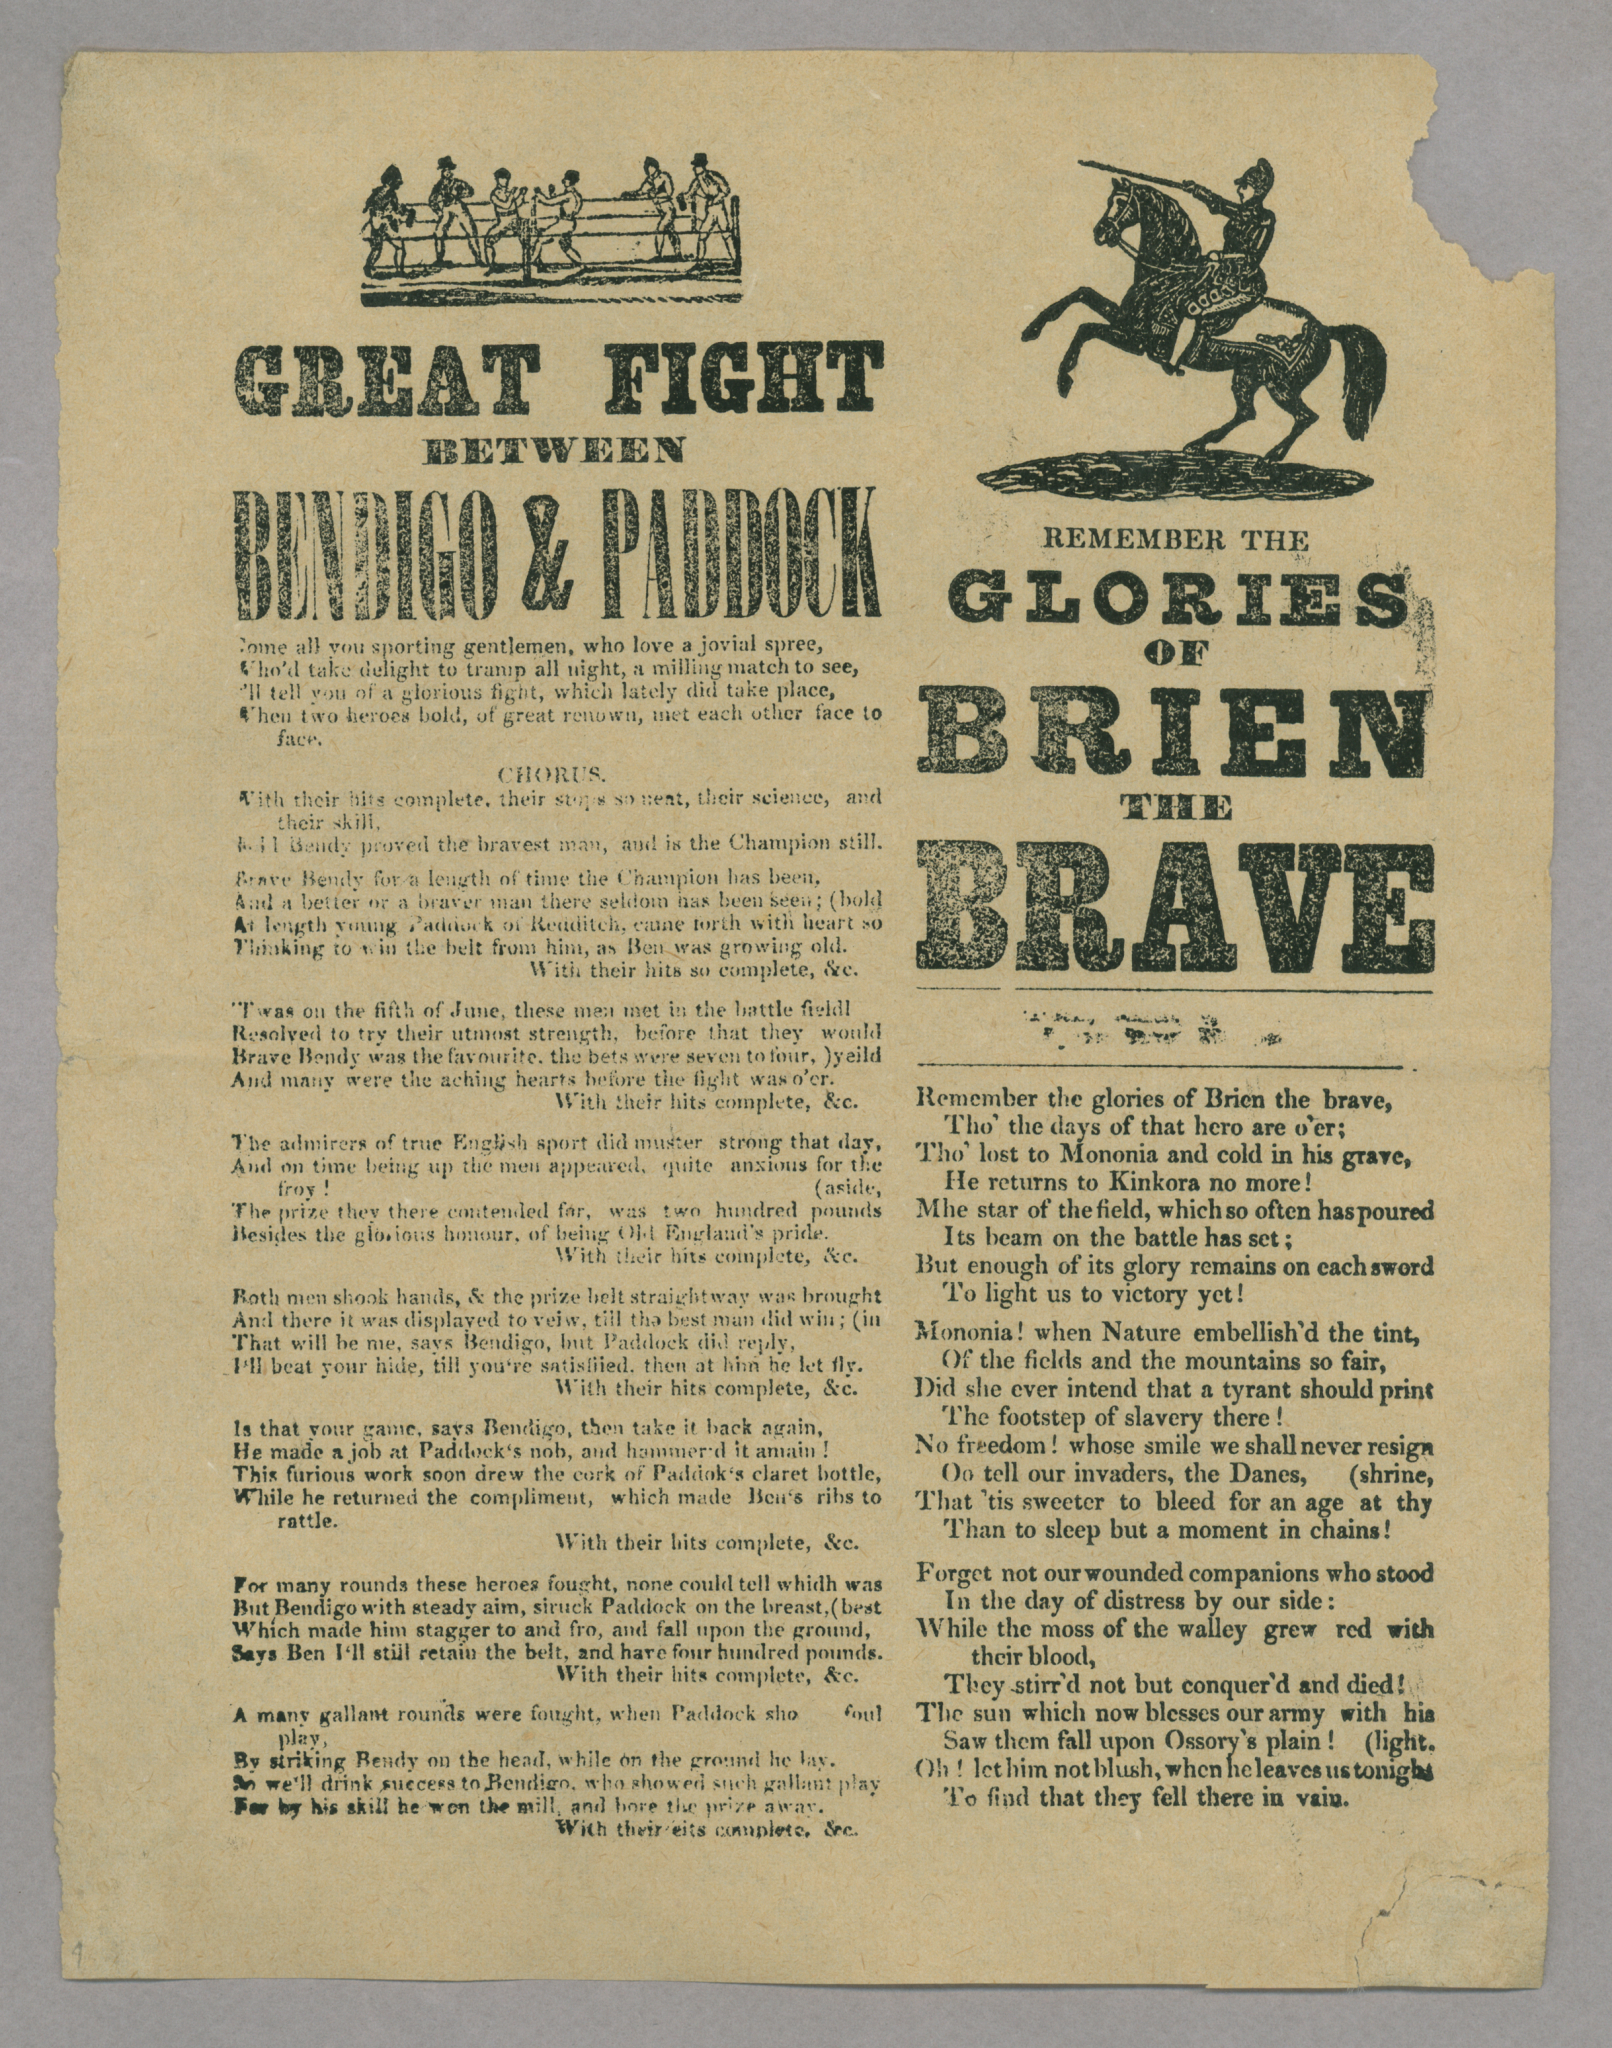 &quot;Great Fight Between Bendigo and Paddock,&quot; and &quot;Remember the Glories of Brien the Brave&quot;